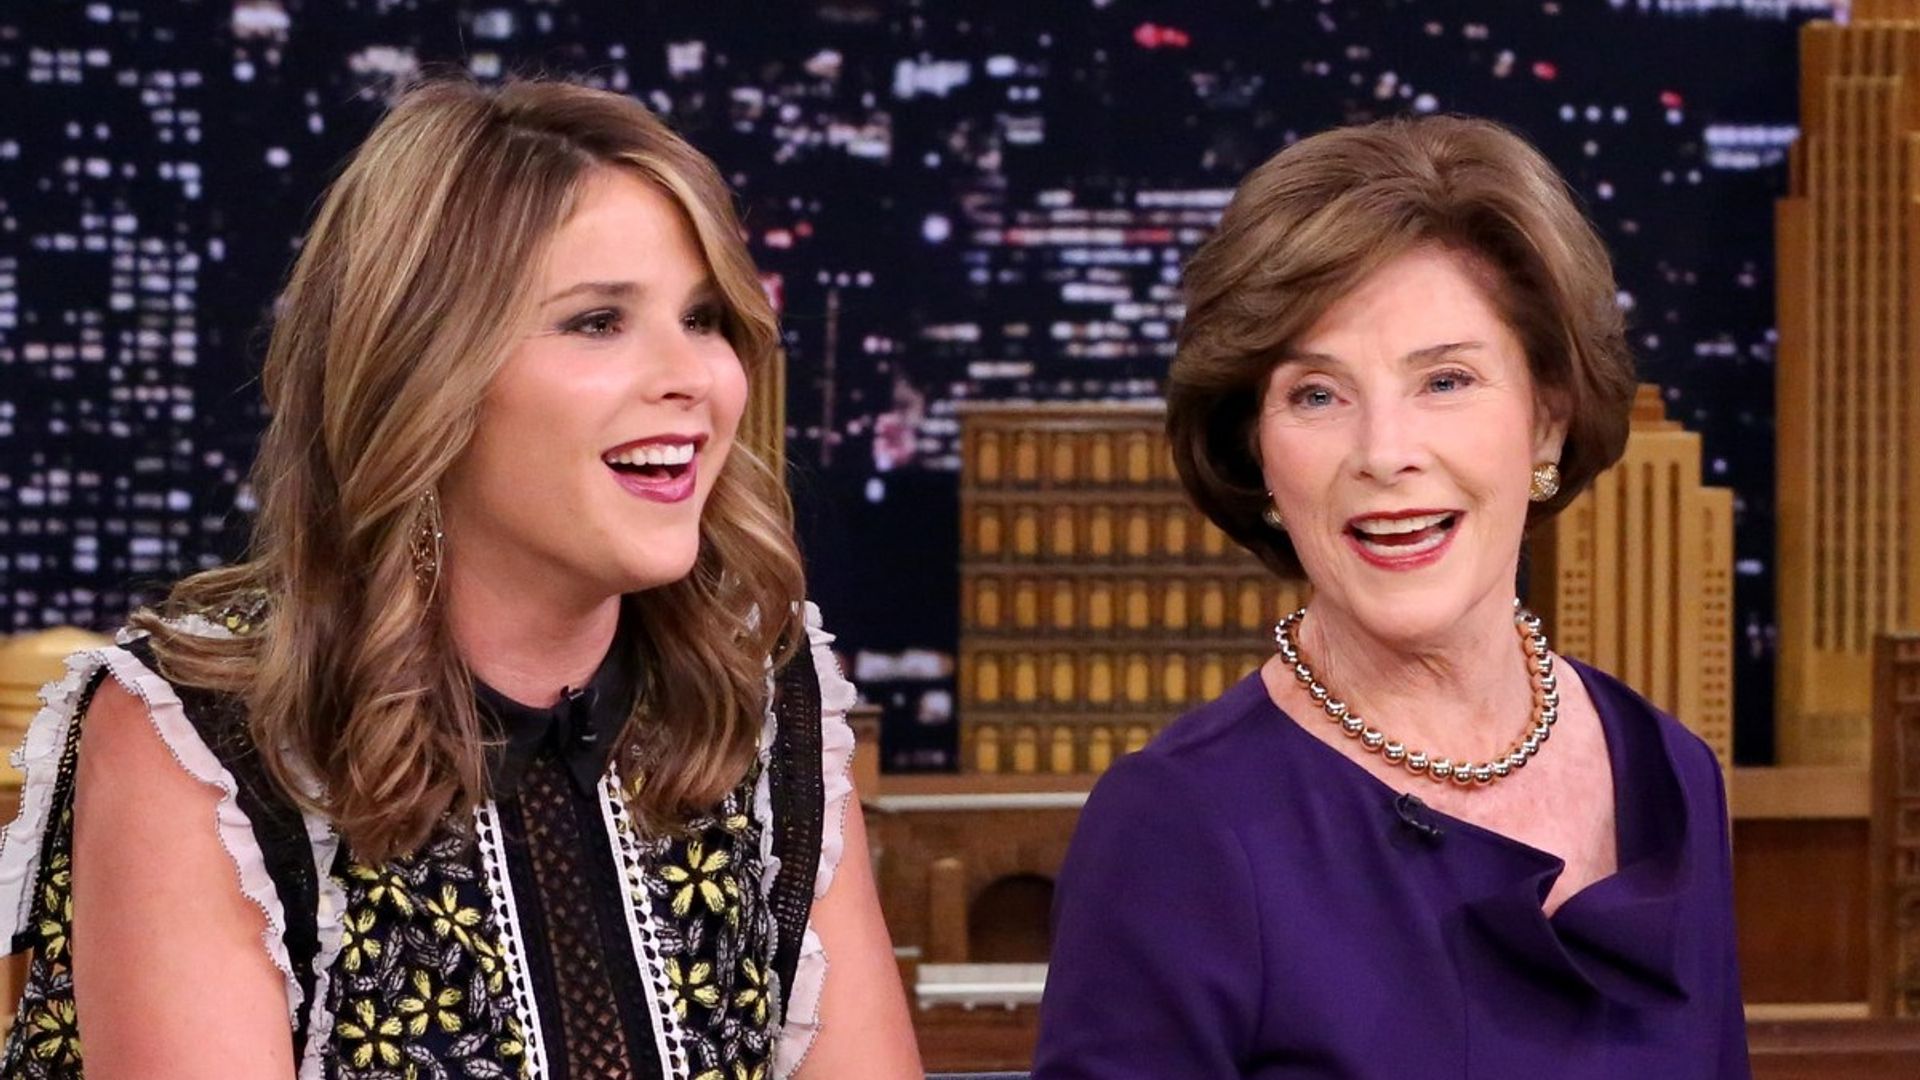 Jenna Bush Hager praises mom Laura Bush after sharing emotional story about daughters